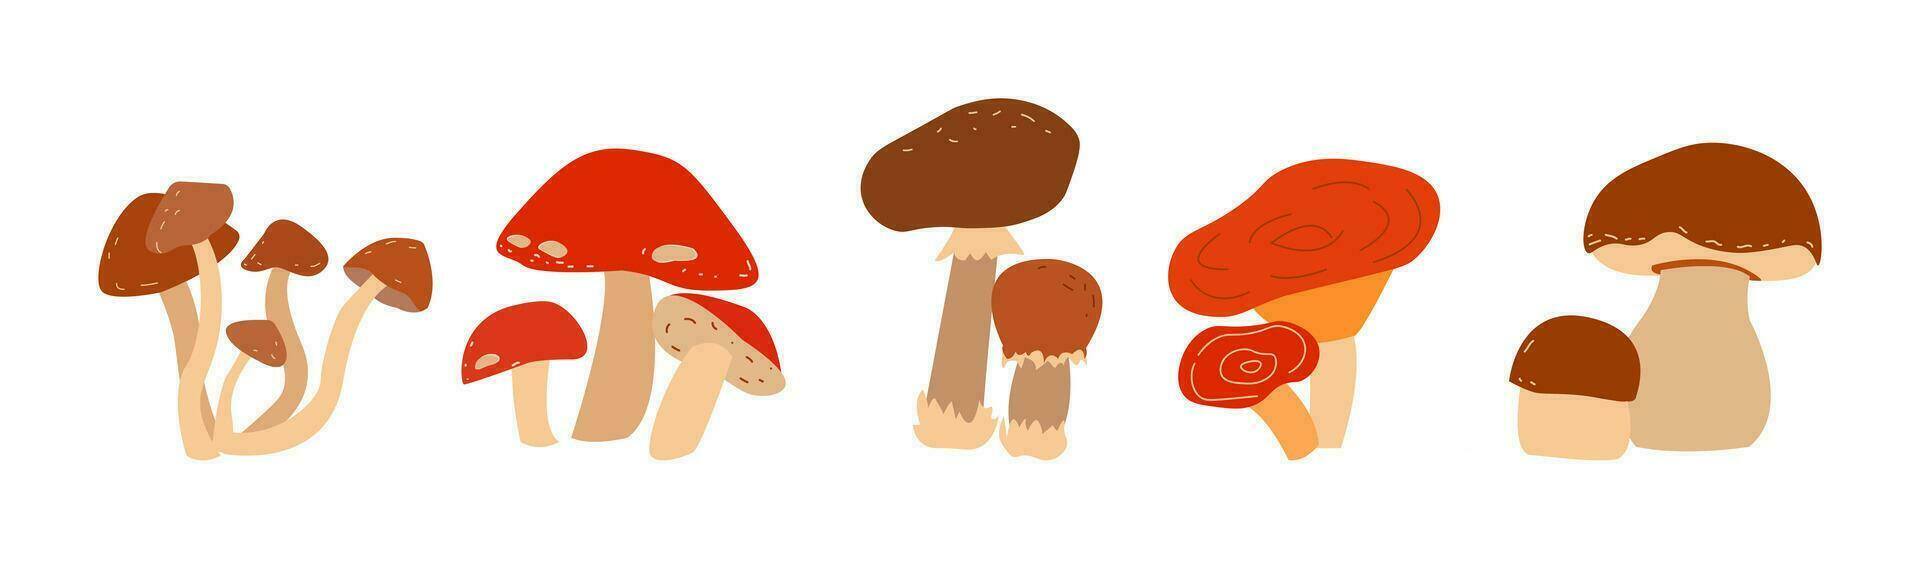 Set with mushrooms on white background. Happy harvest. vector